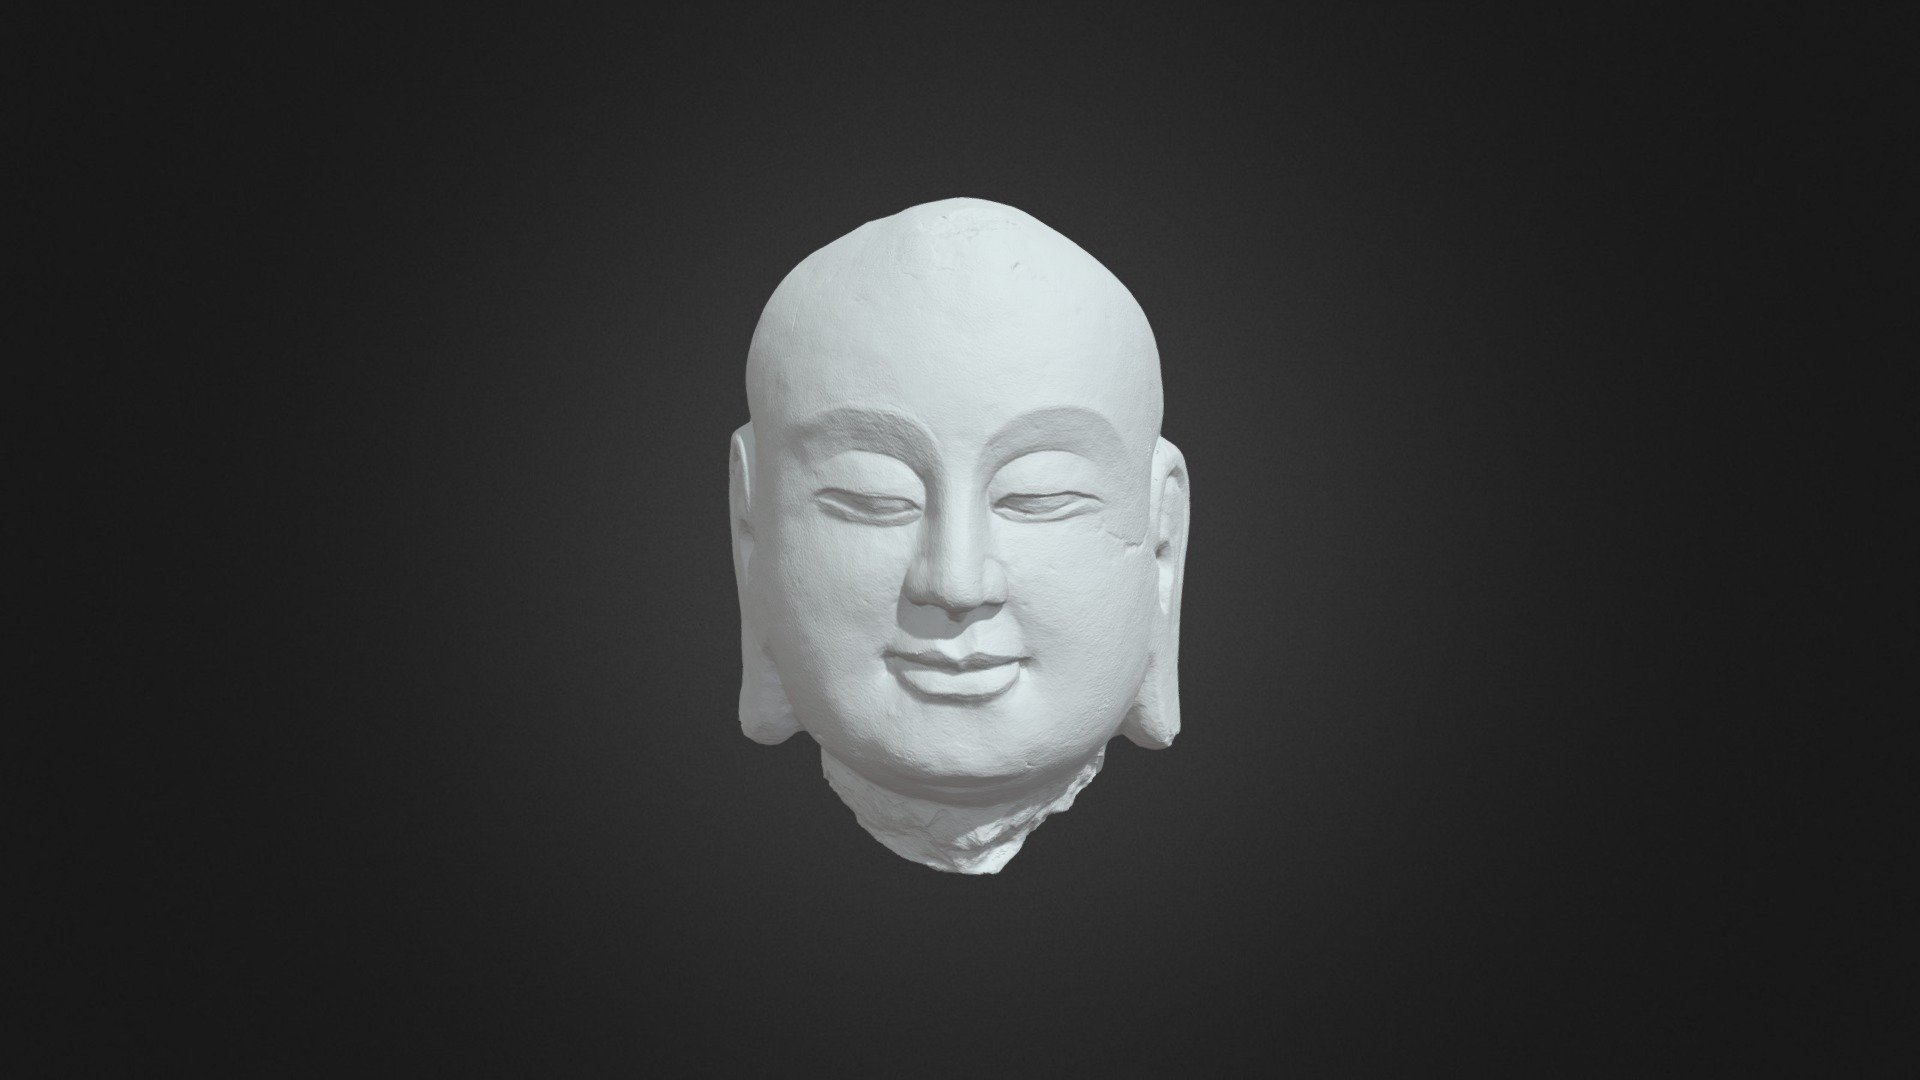 Current location: Smithsonian’s National Museum of Asian Art (Freer and Sackler Galleries)

Work ID: F1913.134

Source: https://asia.si.edu/explore-art-culture/collections/search/edanmdm:fsg_F1913.134/

CAEA record: https://caeacollections.lib.uchicago.edu/view/7571

Reference: https://xts.uchicago.edu/single-sculpture/27 - FSG-F1913-134 Disciple Ananda Head (no texture) - 3D model by Center for the Art of East Asia (@caea) 3d model